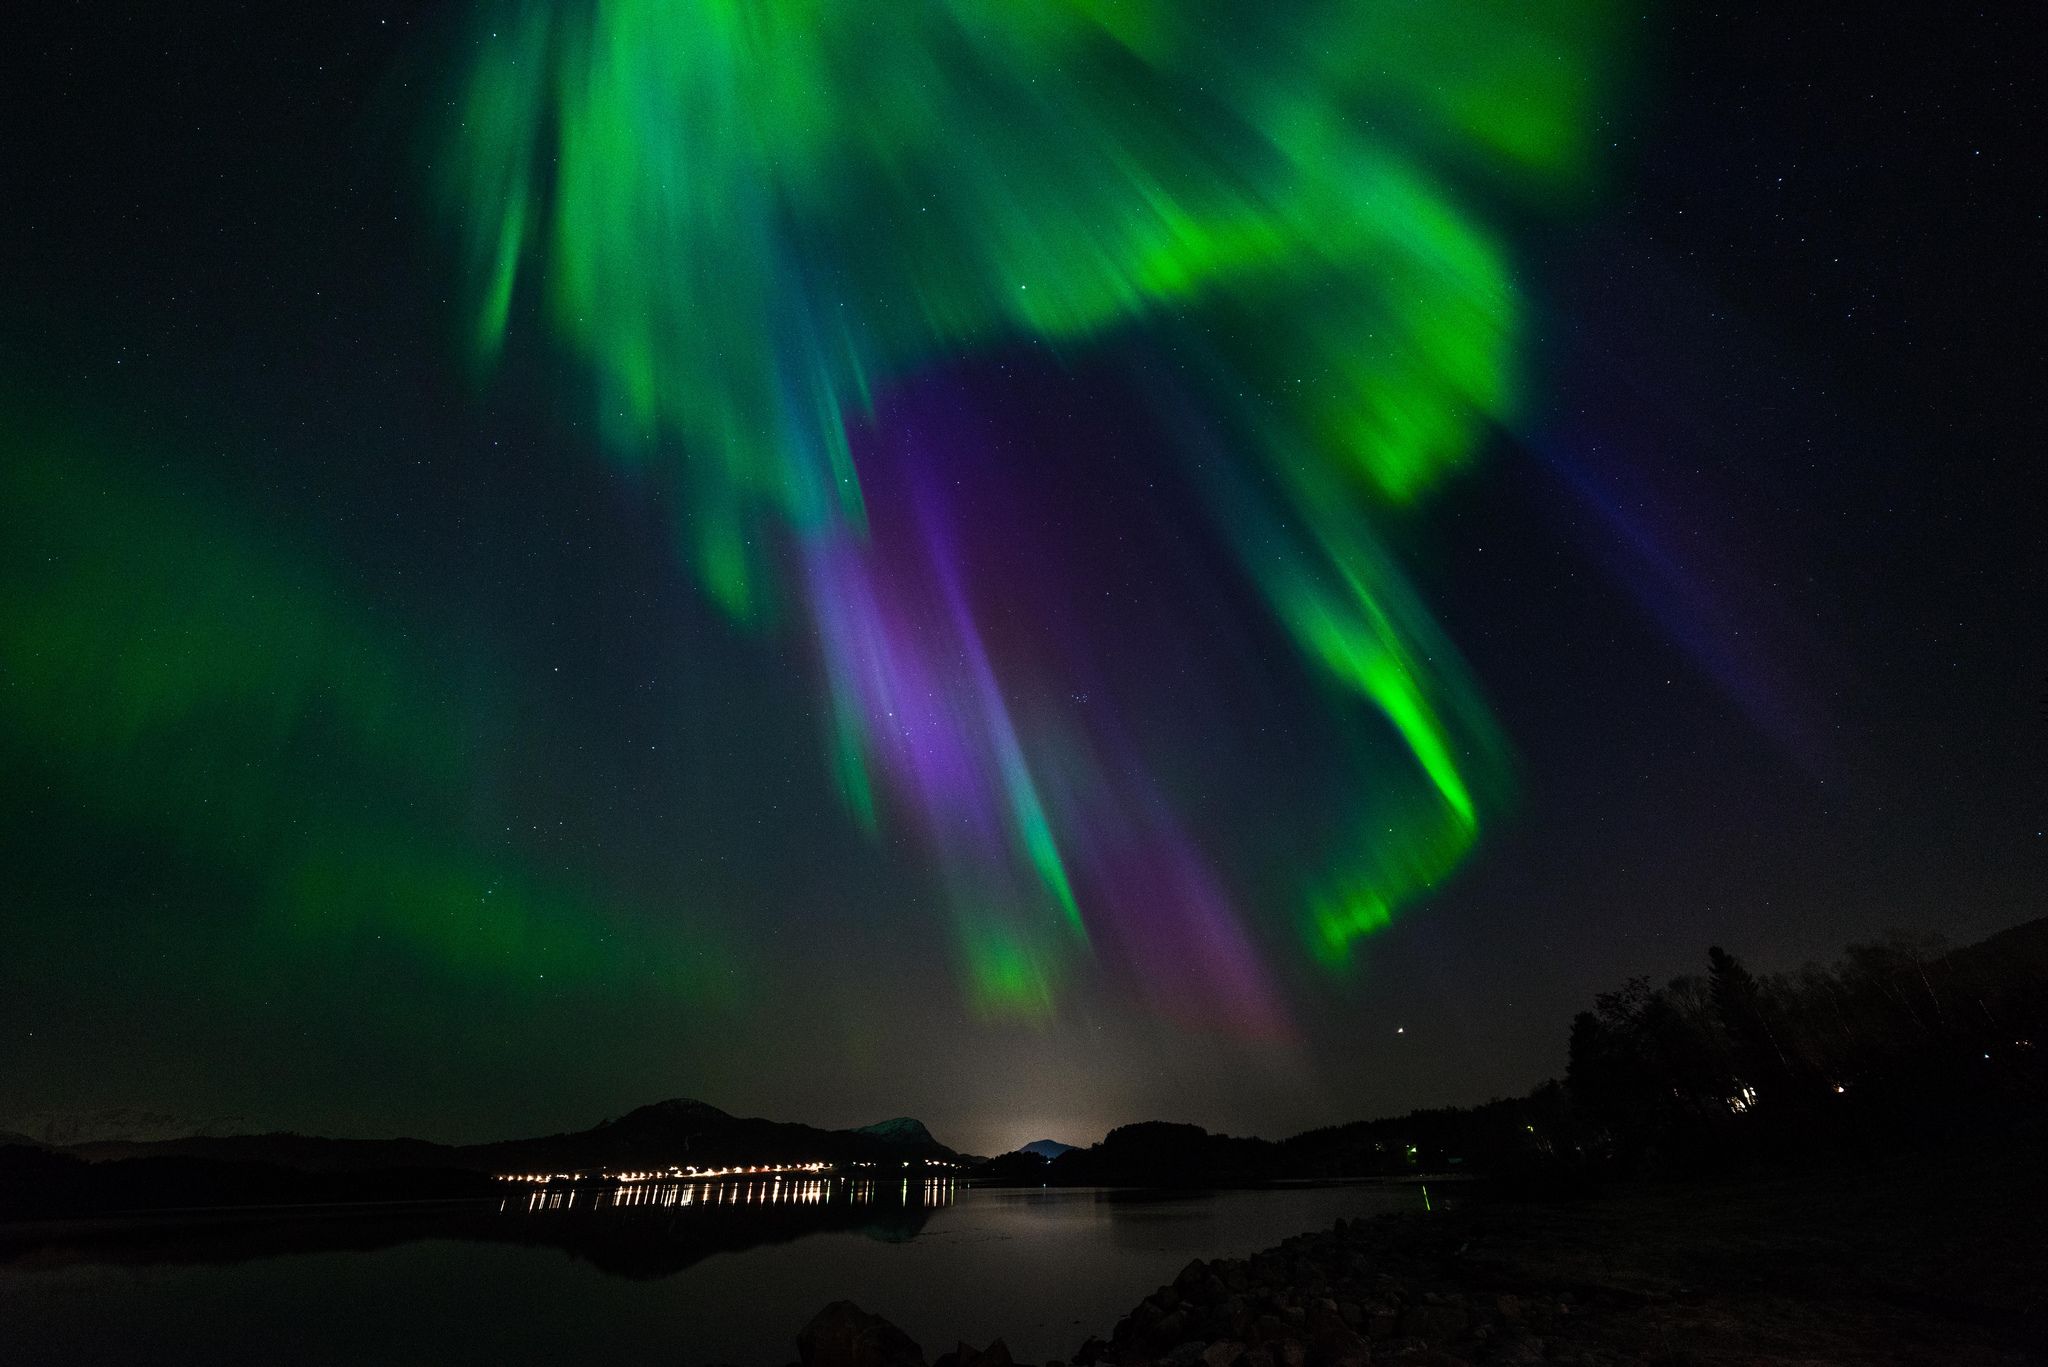 Nothern lights spanning the night sky, showing ribbons of purple, blue, and green